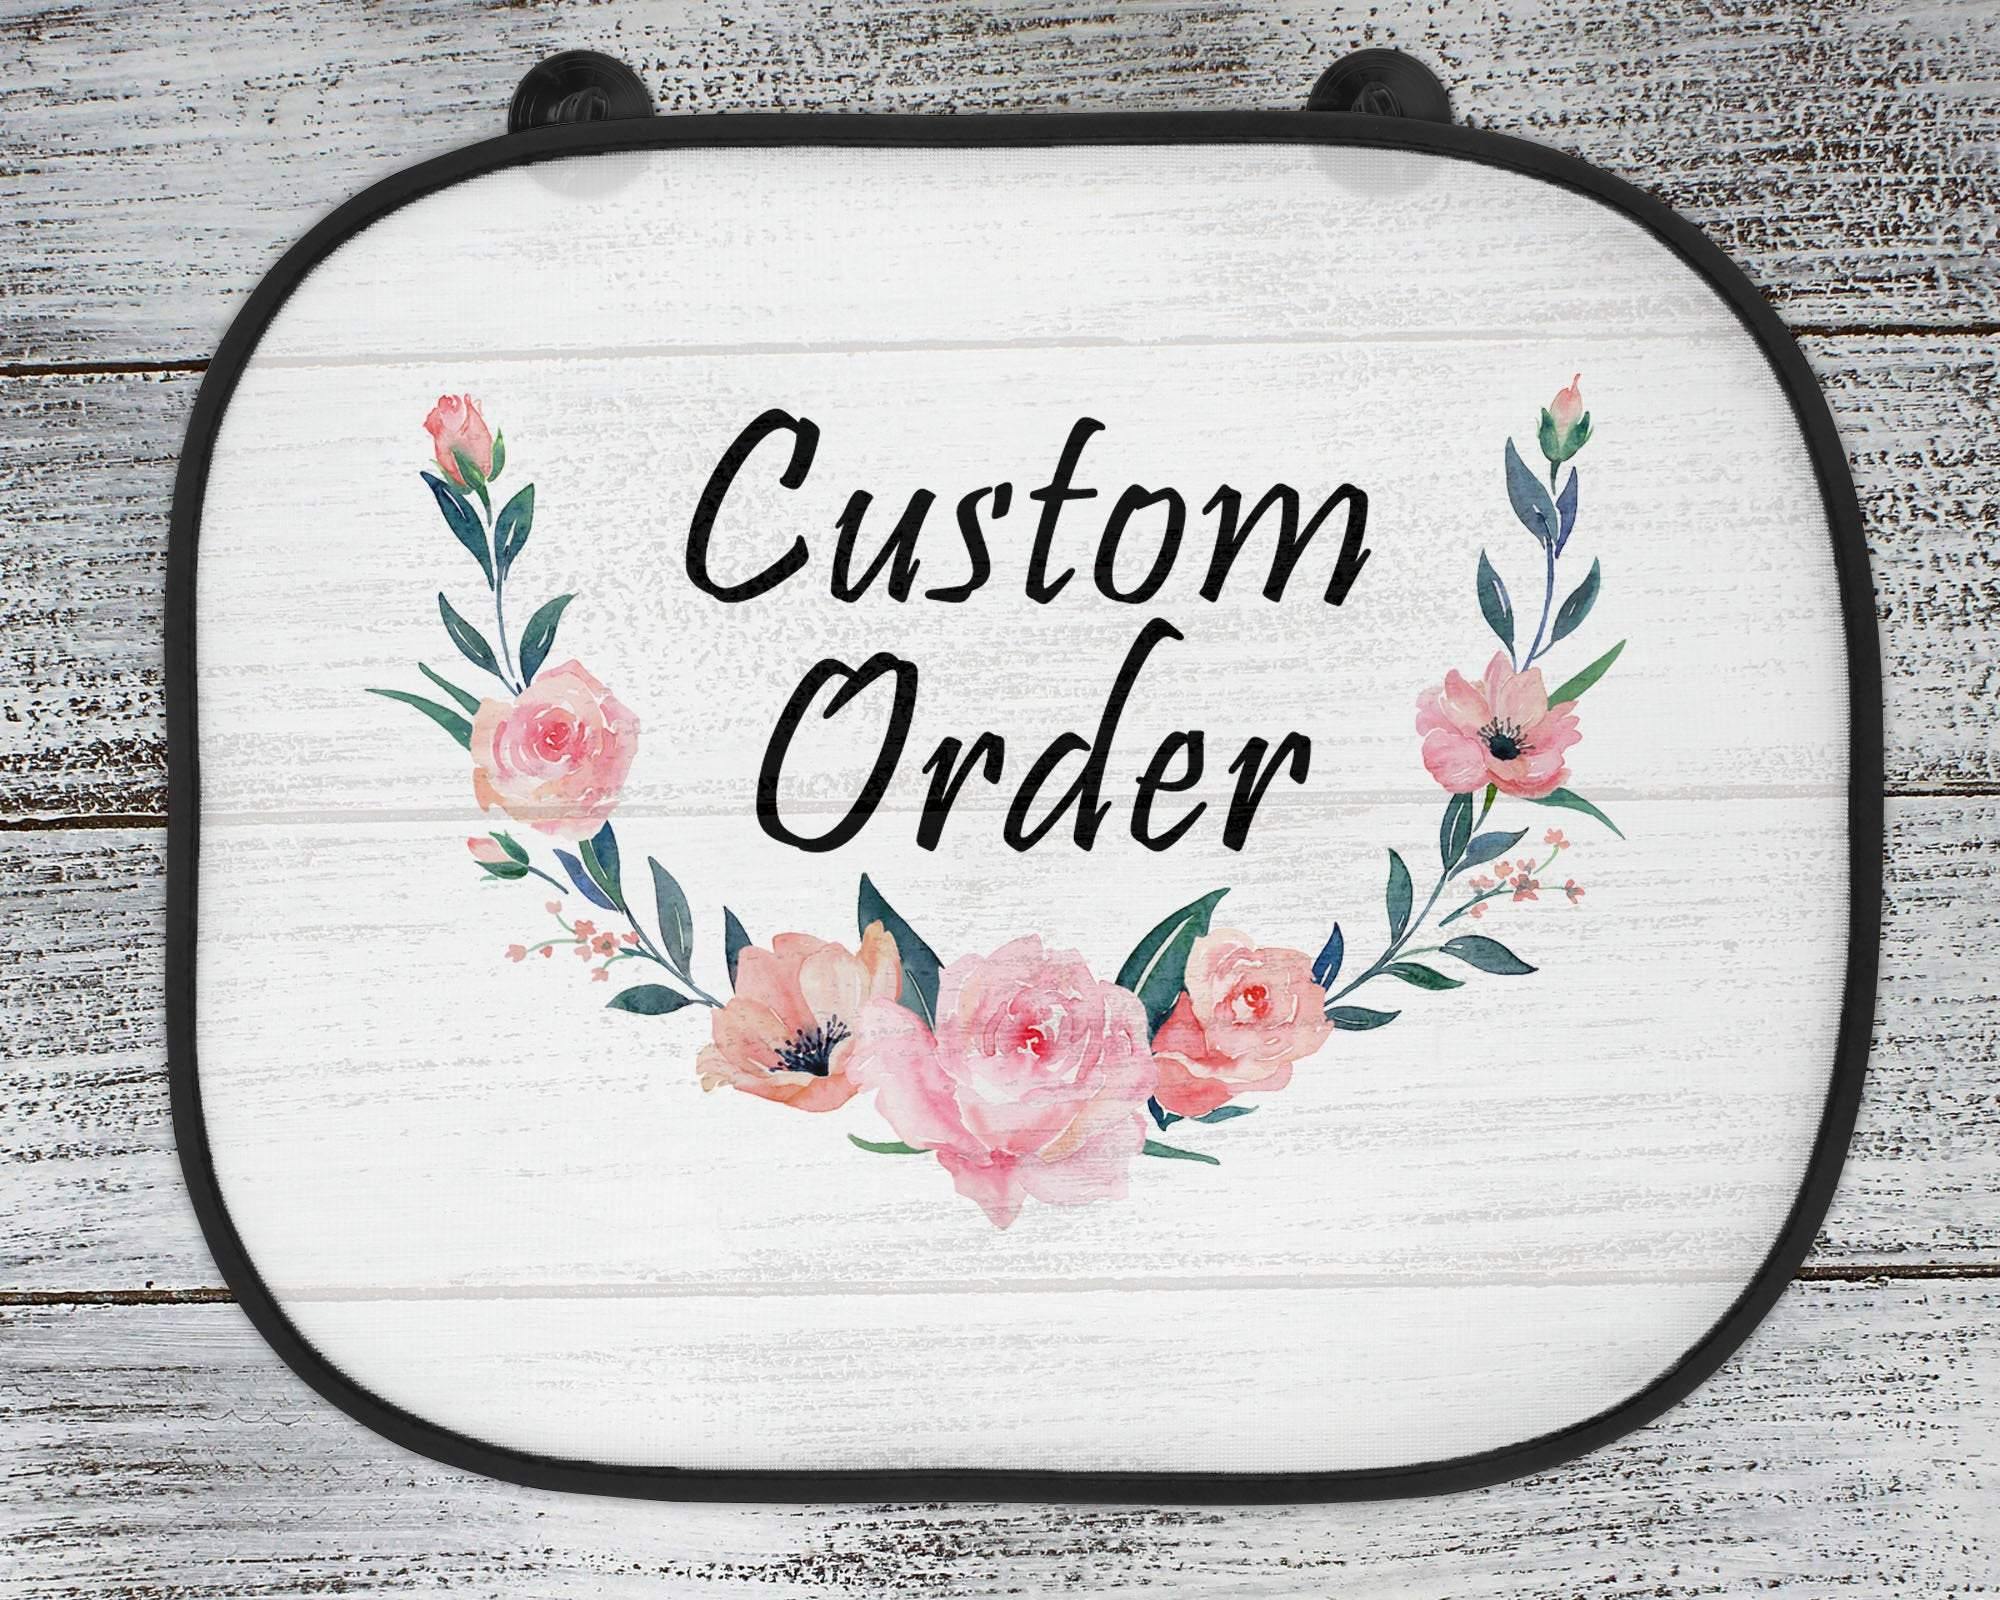 Personalized Sun Shade | Custom Car Shade | Vehicle Shade | Custom Order - This & That Solutions - Personalized Sun Shade | Custom Car Shade | Vehicle Shade | Custom Order - Personalized Gifts & Custom Home Decor